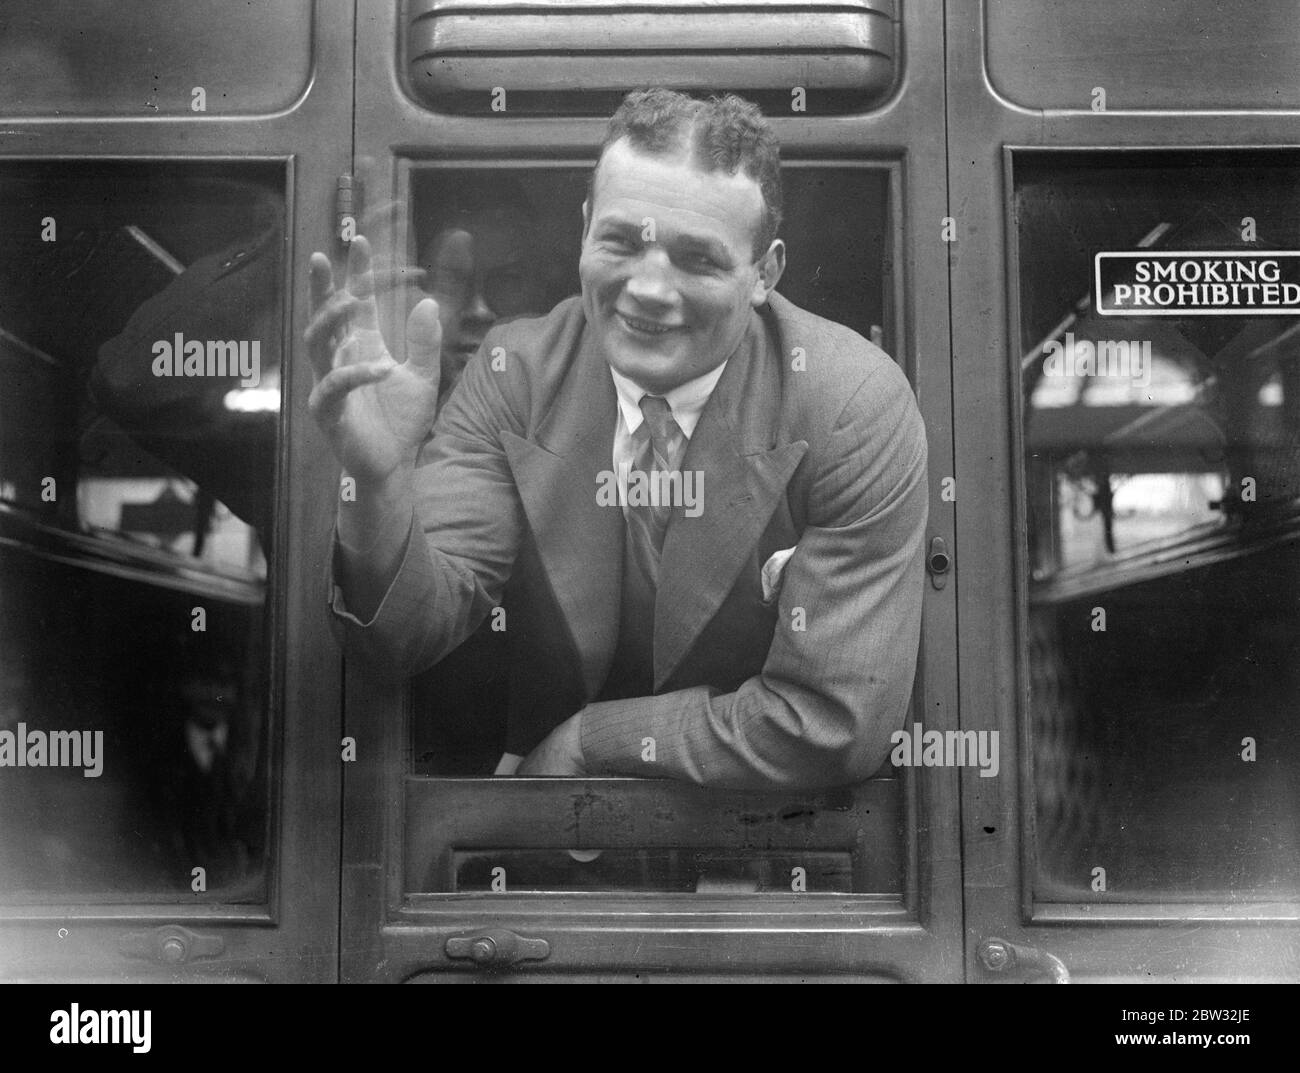 Reggie Meen leaves for Egypt for Championship fight . Reggie Meen the heavyweight boxing champion of Britain left England on the S S Ballarat for Egypt to fight Salar ed Din , the Egyptian Champion in Cairo . Reggie Meen at the window of his carriage as he left Liverpool St Station , London . 15 April 1932 . Stock Photo